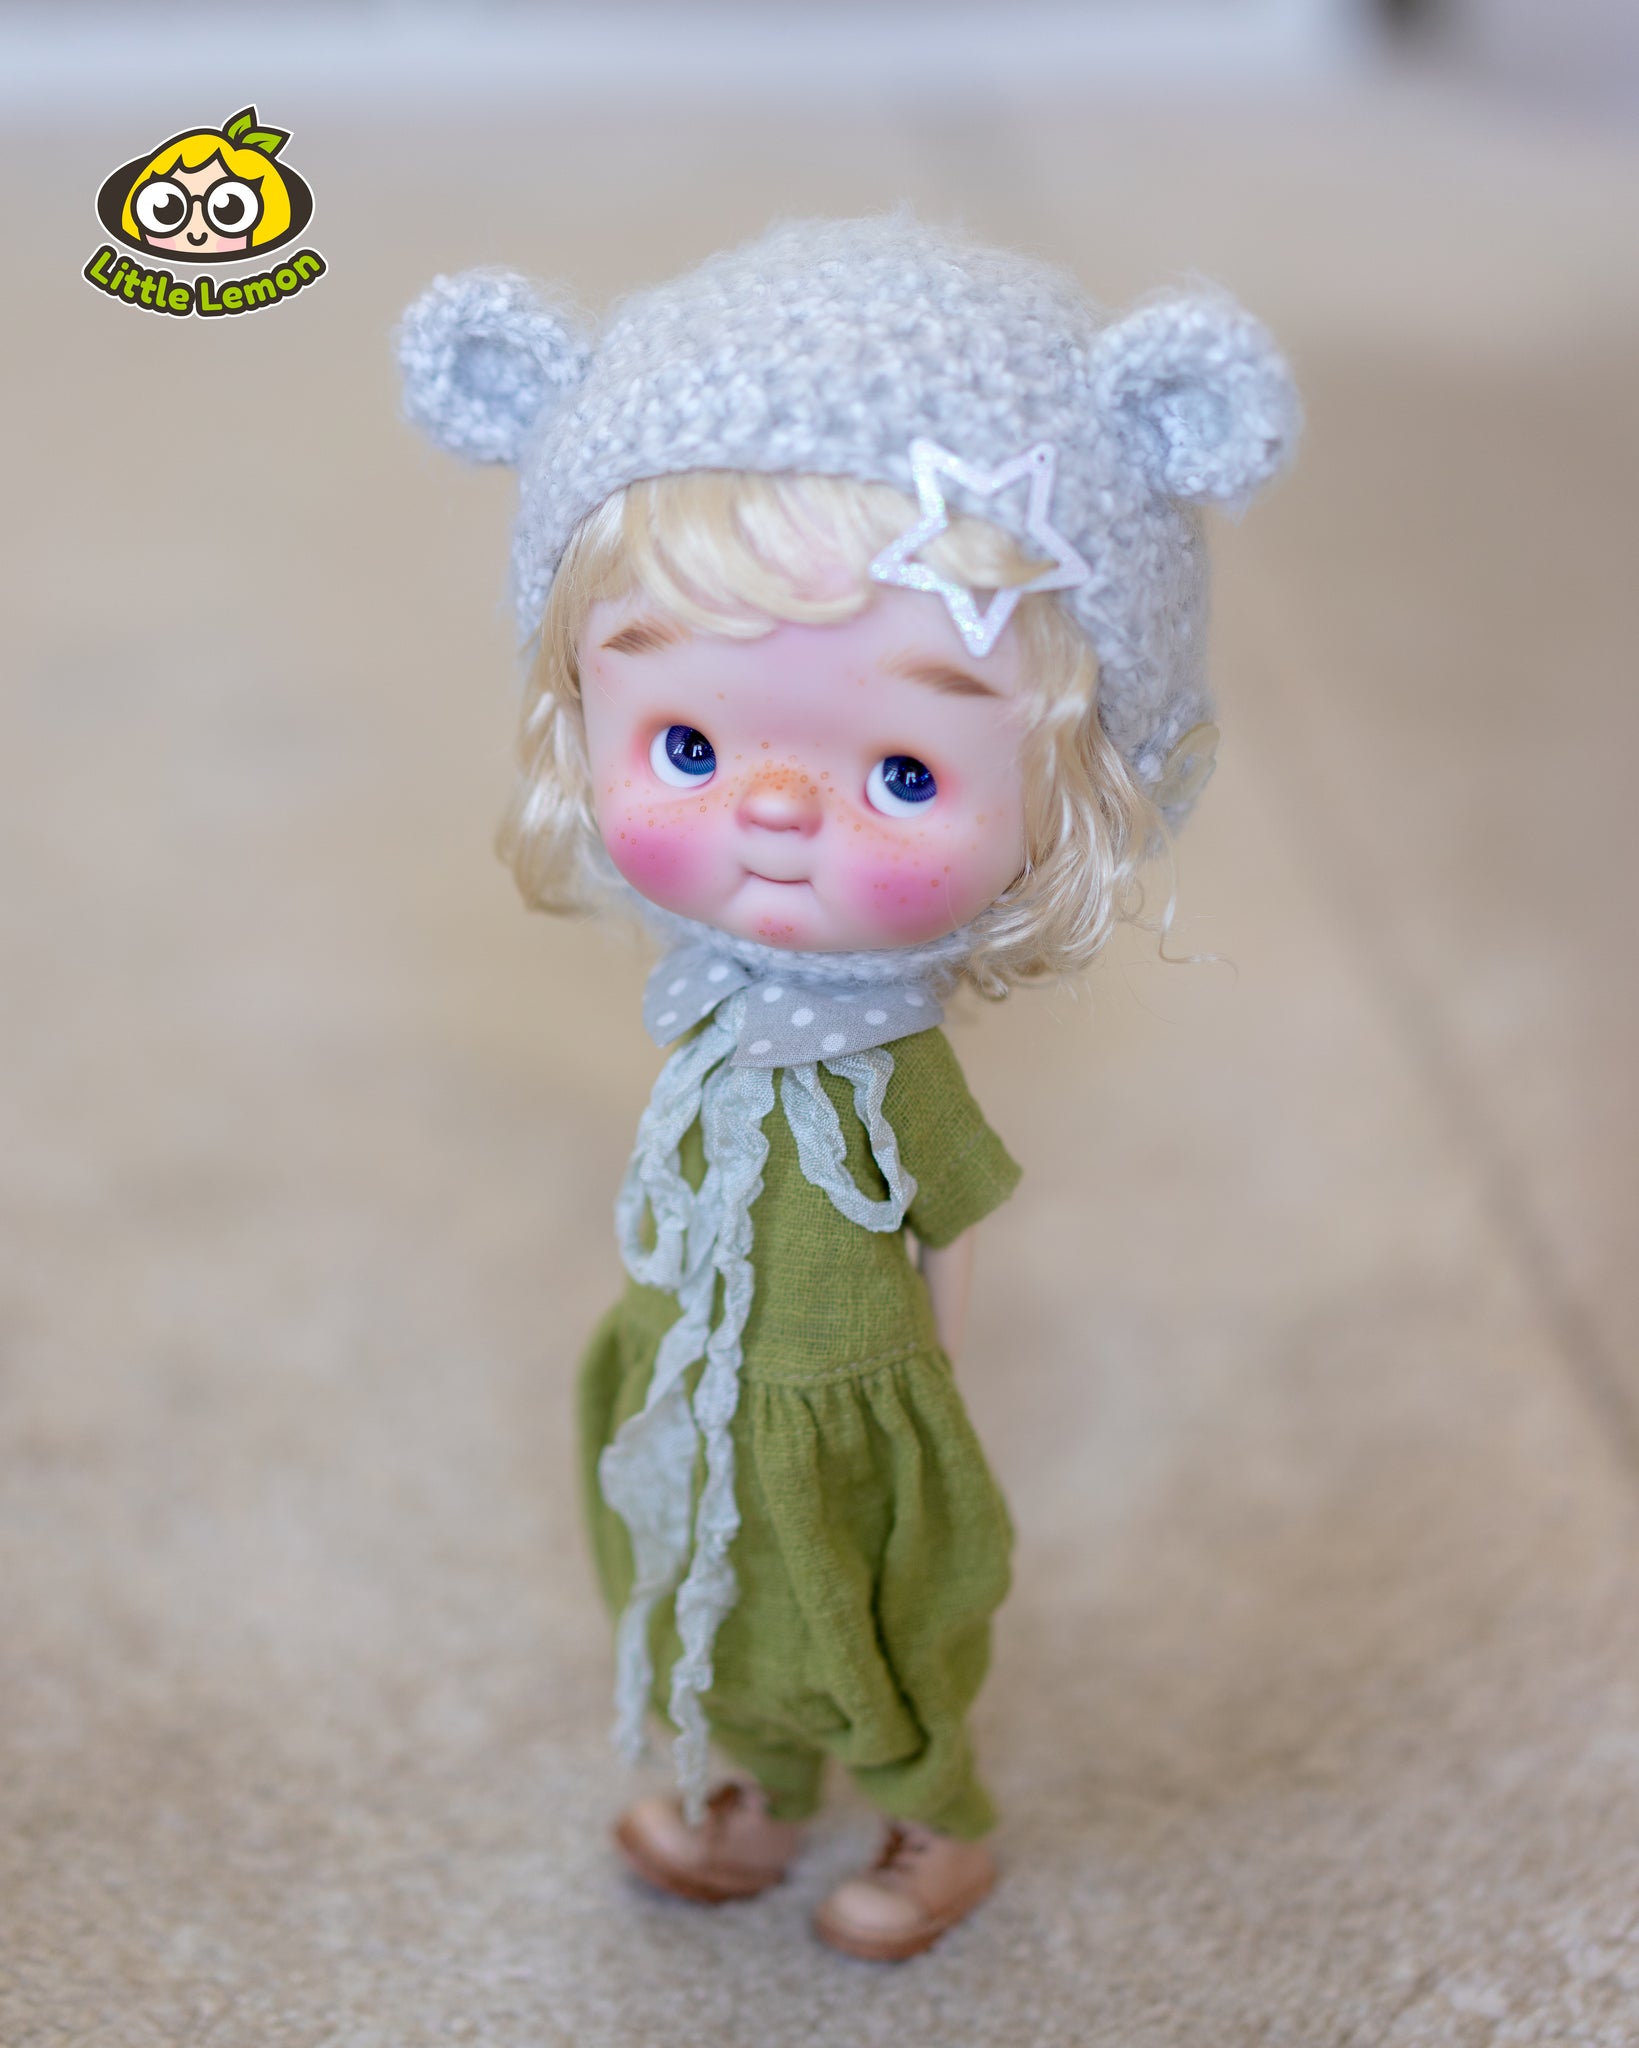 QBABY DOLLS by RODGERDOLL: VELCRO HATS & ACCESSORIES